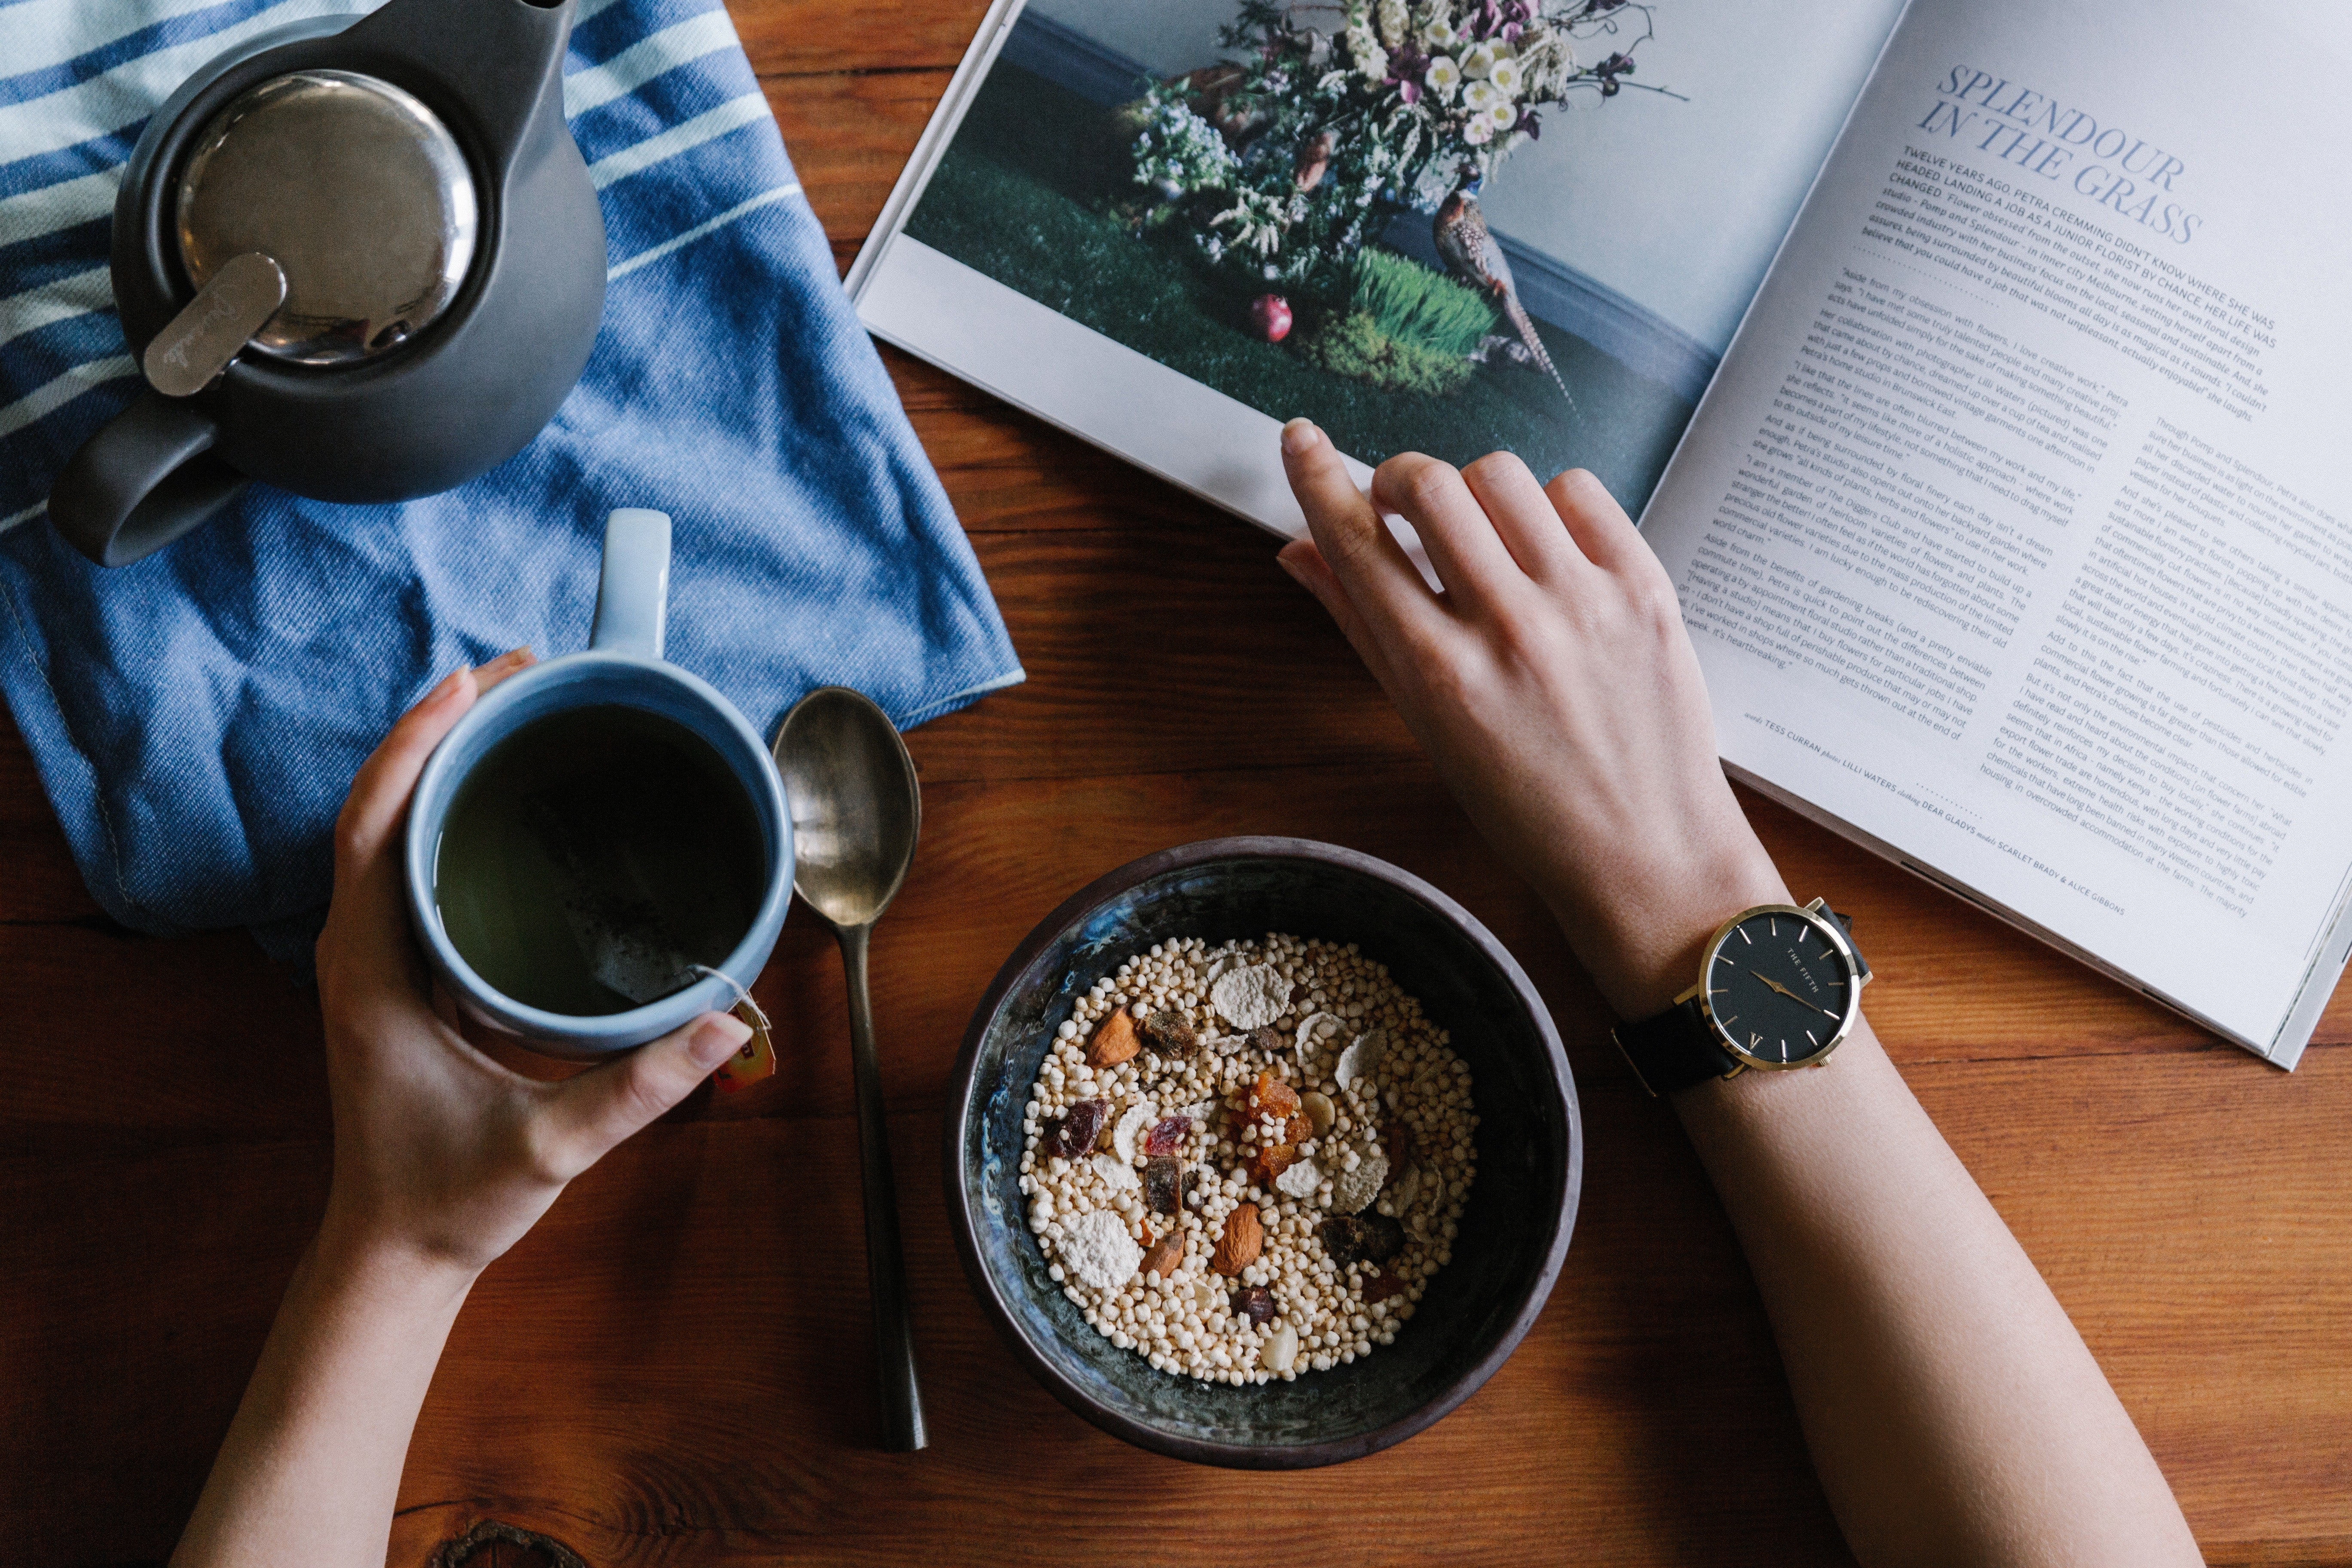 Oats and coffee on a table with a book and a pair of hands lying on it